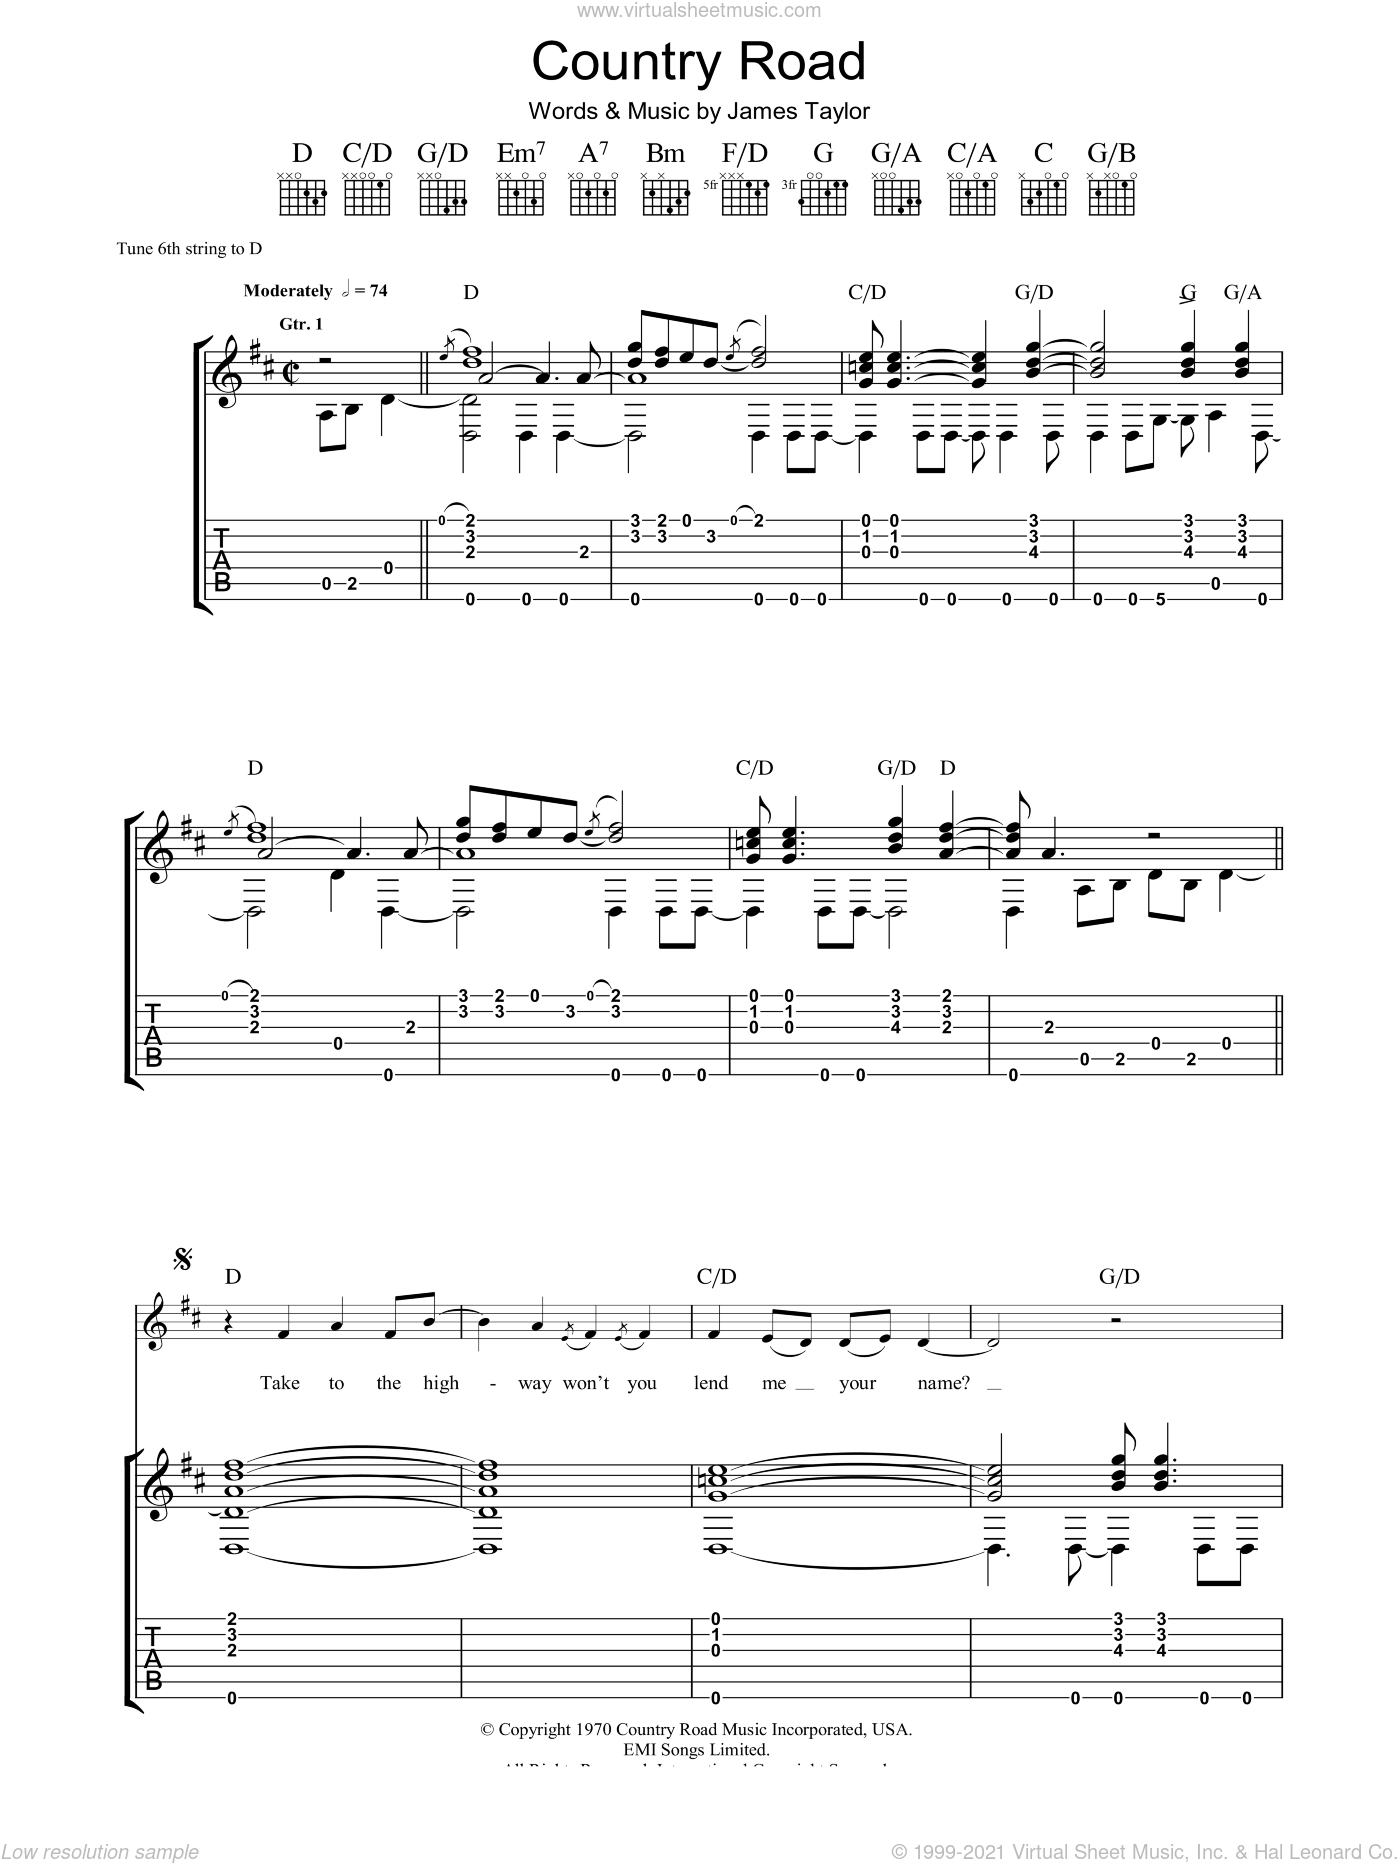 taylor-country-road-sheet-music-for-guitar-tablature-pdf